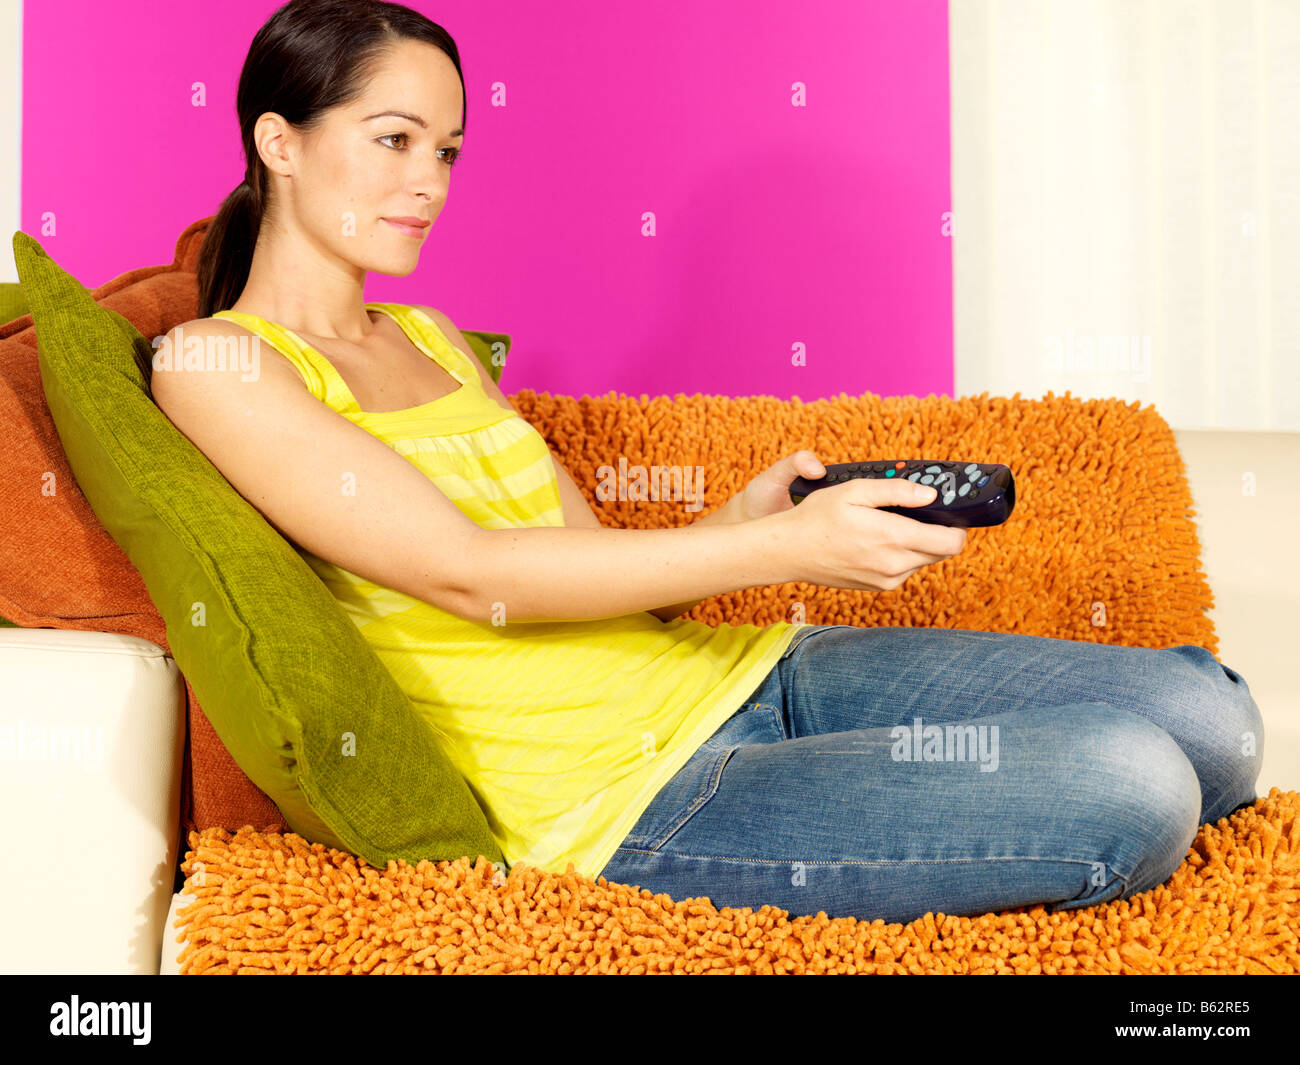 Young Woman Watching Television Model Released Stock Photo